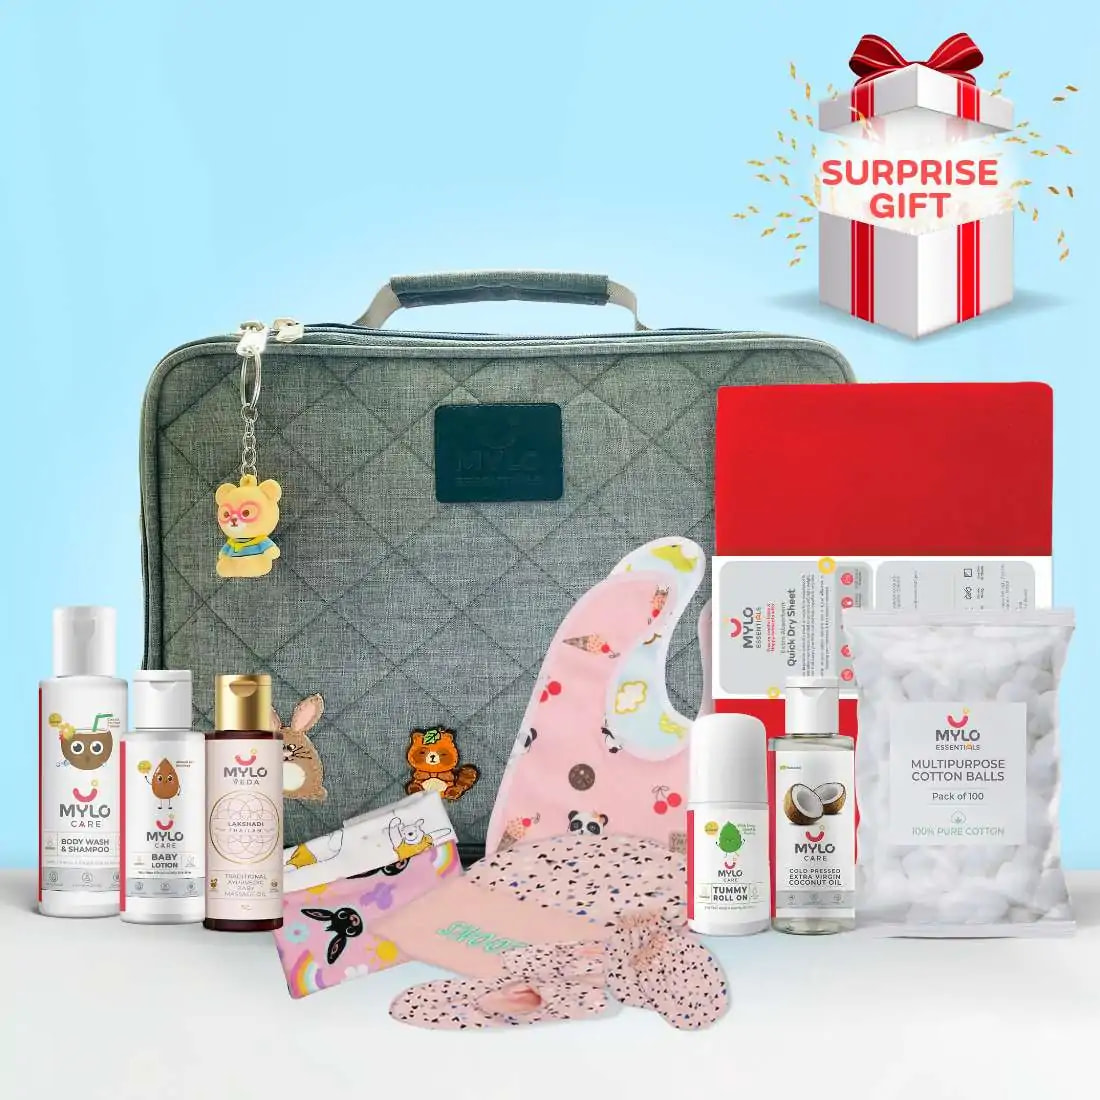 Mylo New Baby Complete Care Gift Set - Mini Baby Suitcase Worth Rs 999/- Free & A Surprise Gift